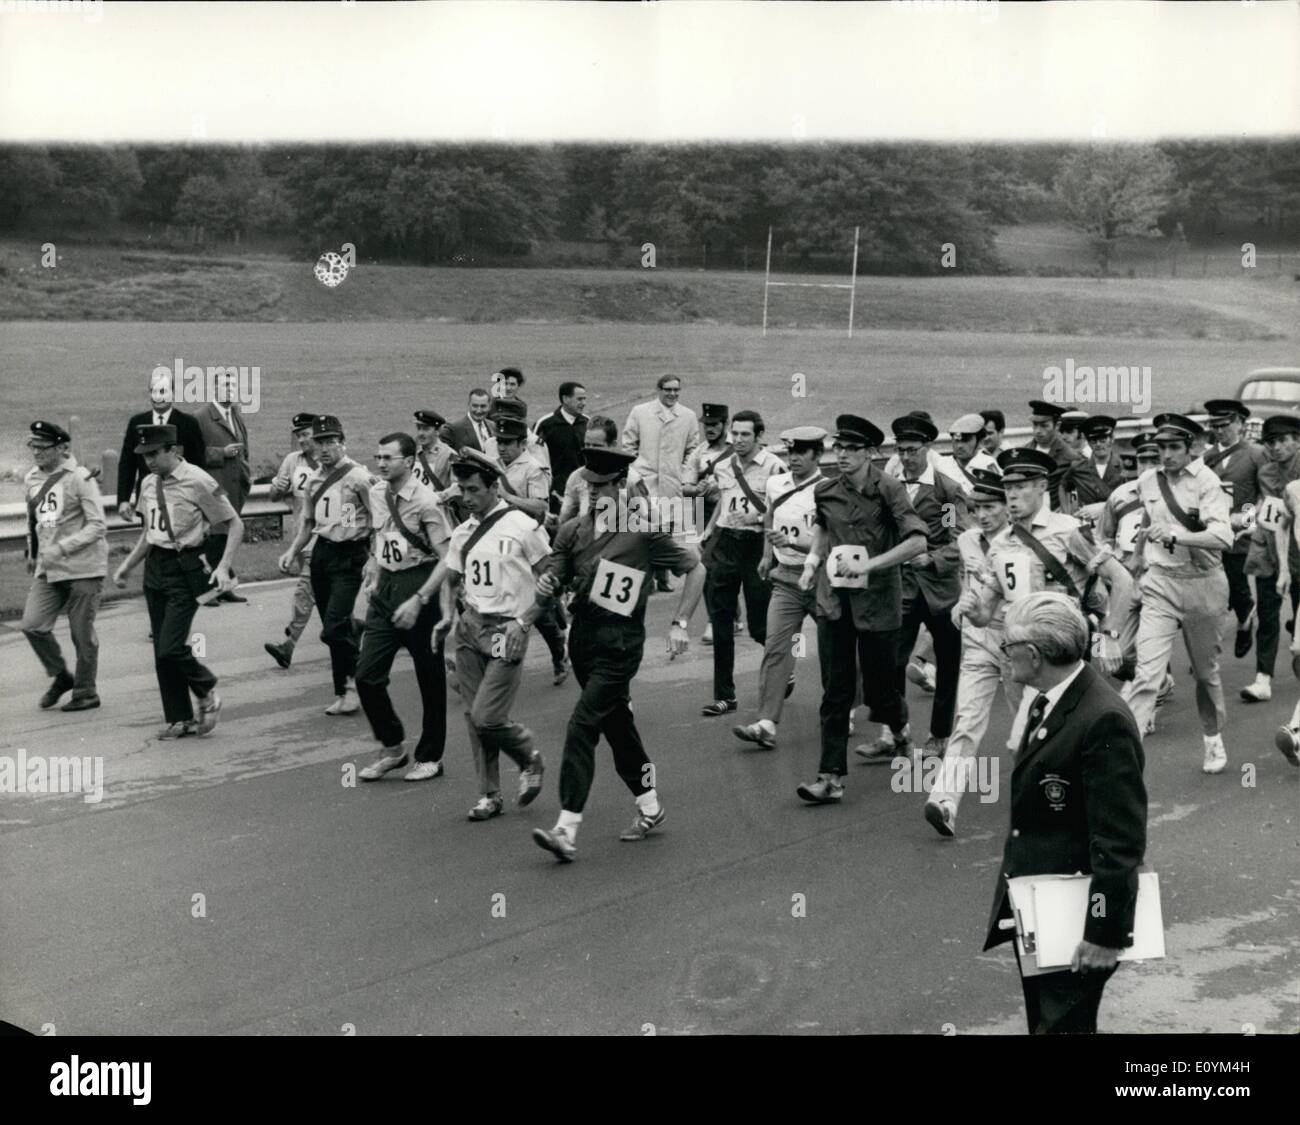 Sep. 09, 1970 - International Postmen's Road walking Championships at Crystal Palace Sports Centre.: The last European Postman's Walk. to be staged under the present rules -which stipulates that each walker must wear his uniform and carry a mailbag - took place today at the Crystal Palace National Sports Centre. In future Walks competitors will be allowed to wear athletic kit. Six countries took the track for today's event - the first to be staged in in Britain. They are Belgium, Germany, Hungary Italy, Switzerland and Britain Stock Photo